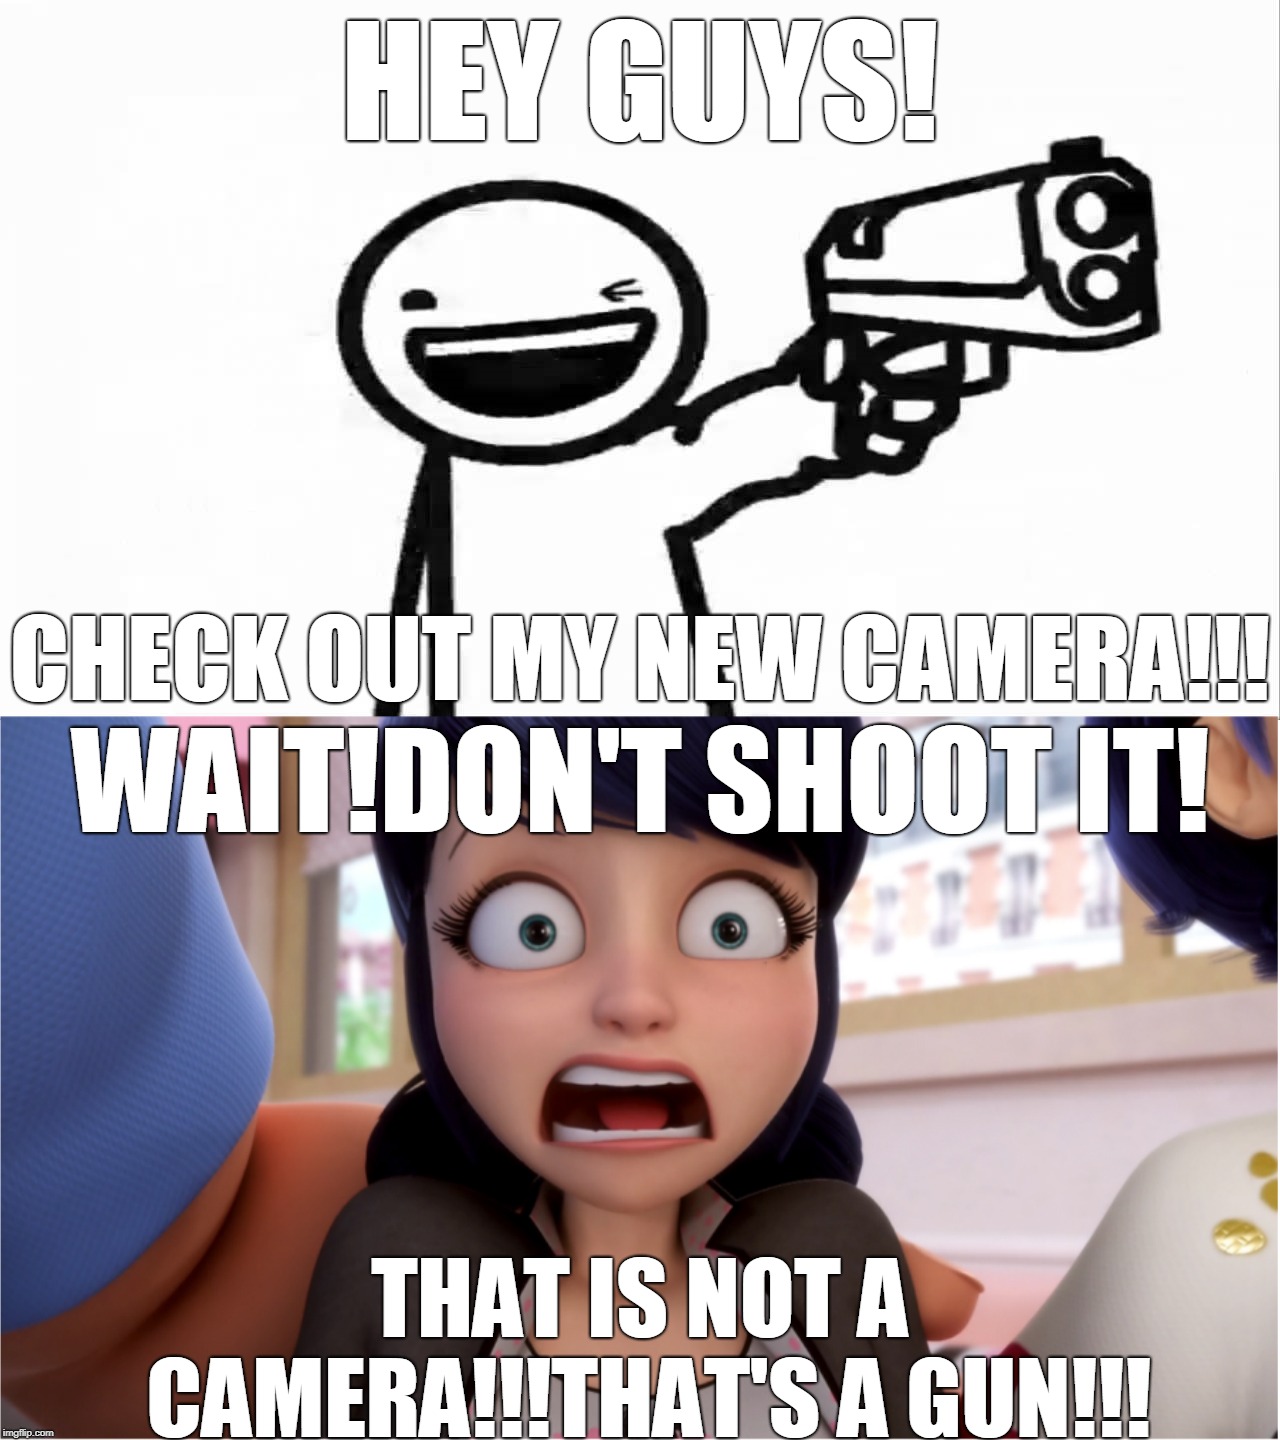 That's Not A Camera!That's A Gun! | HEY GUYS! CHECK OUT MY NEW CAMERA!!! WAIT!DON'T SHOOT IT! THAT IS NOT A CAMERA!!!THAT'S A GUN!!! | image tagged in asdfmovie,memes,miraculous ladybug | made w/ Imgflip meme maker